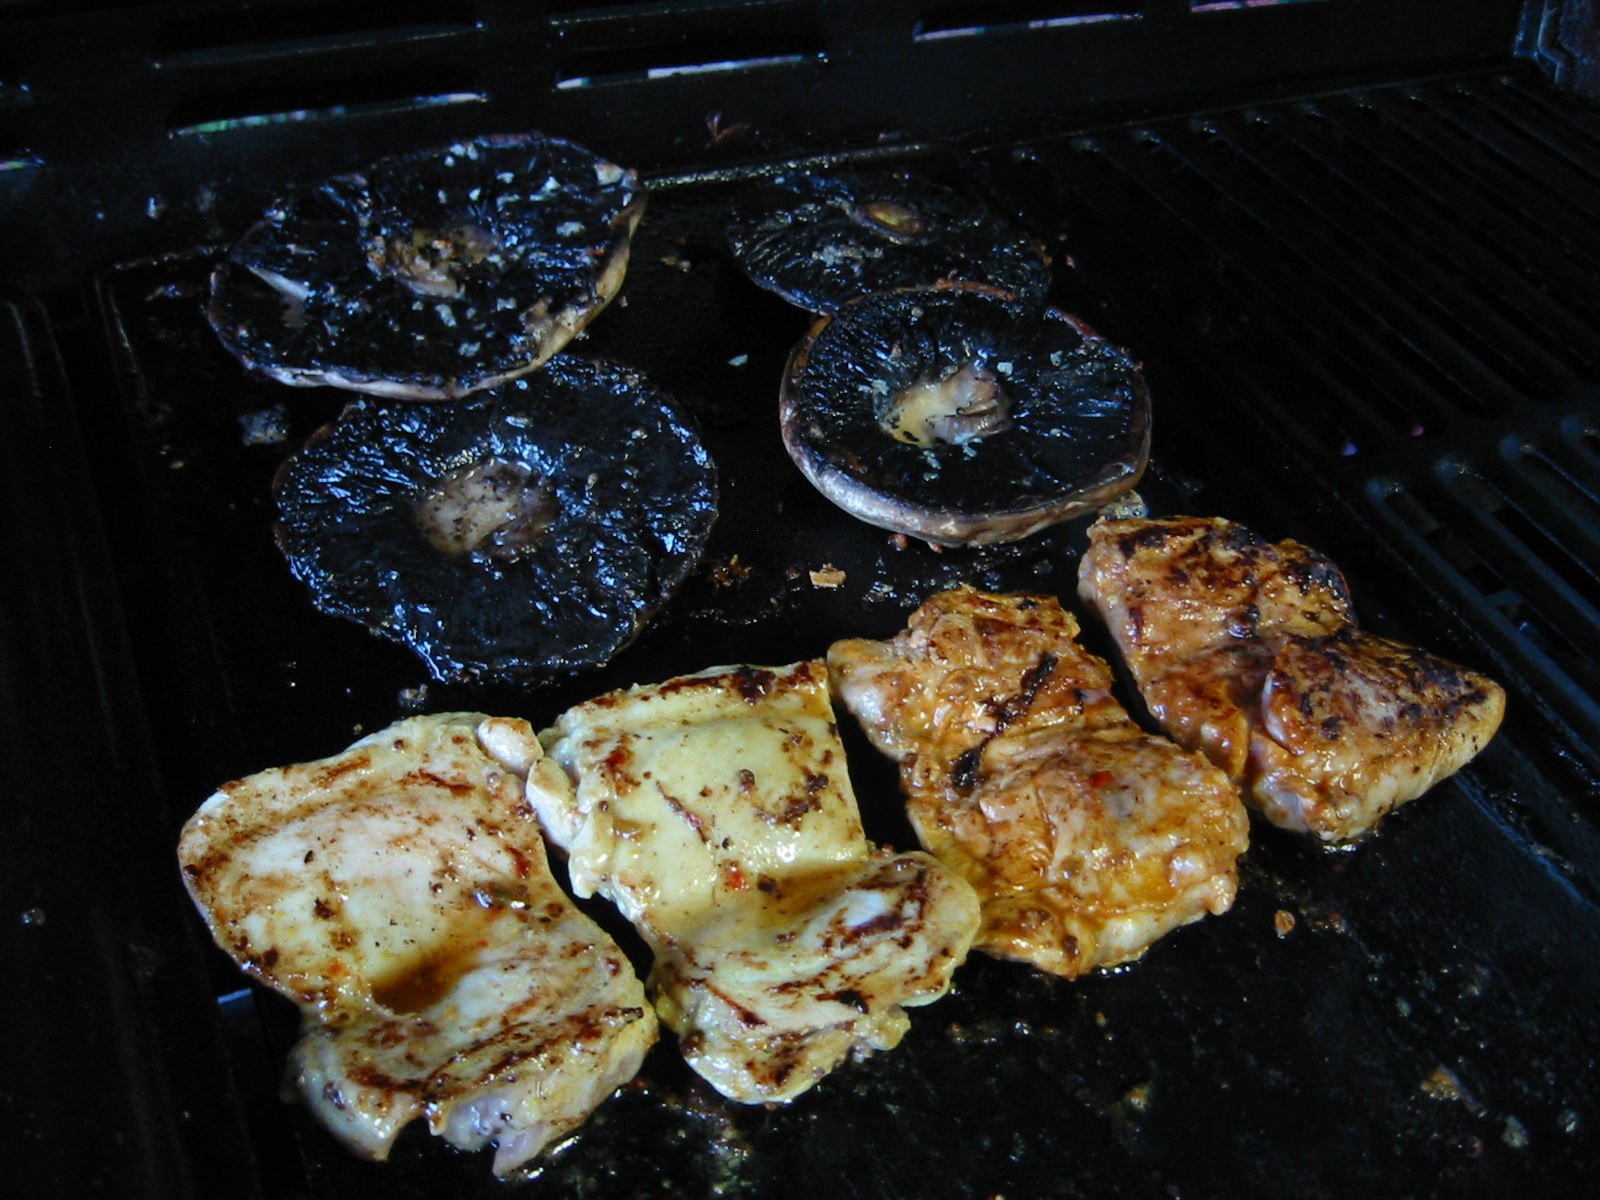 Mushrooms and chicken on the barbie